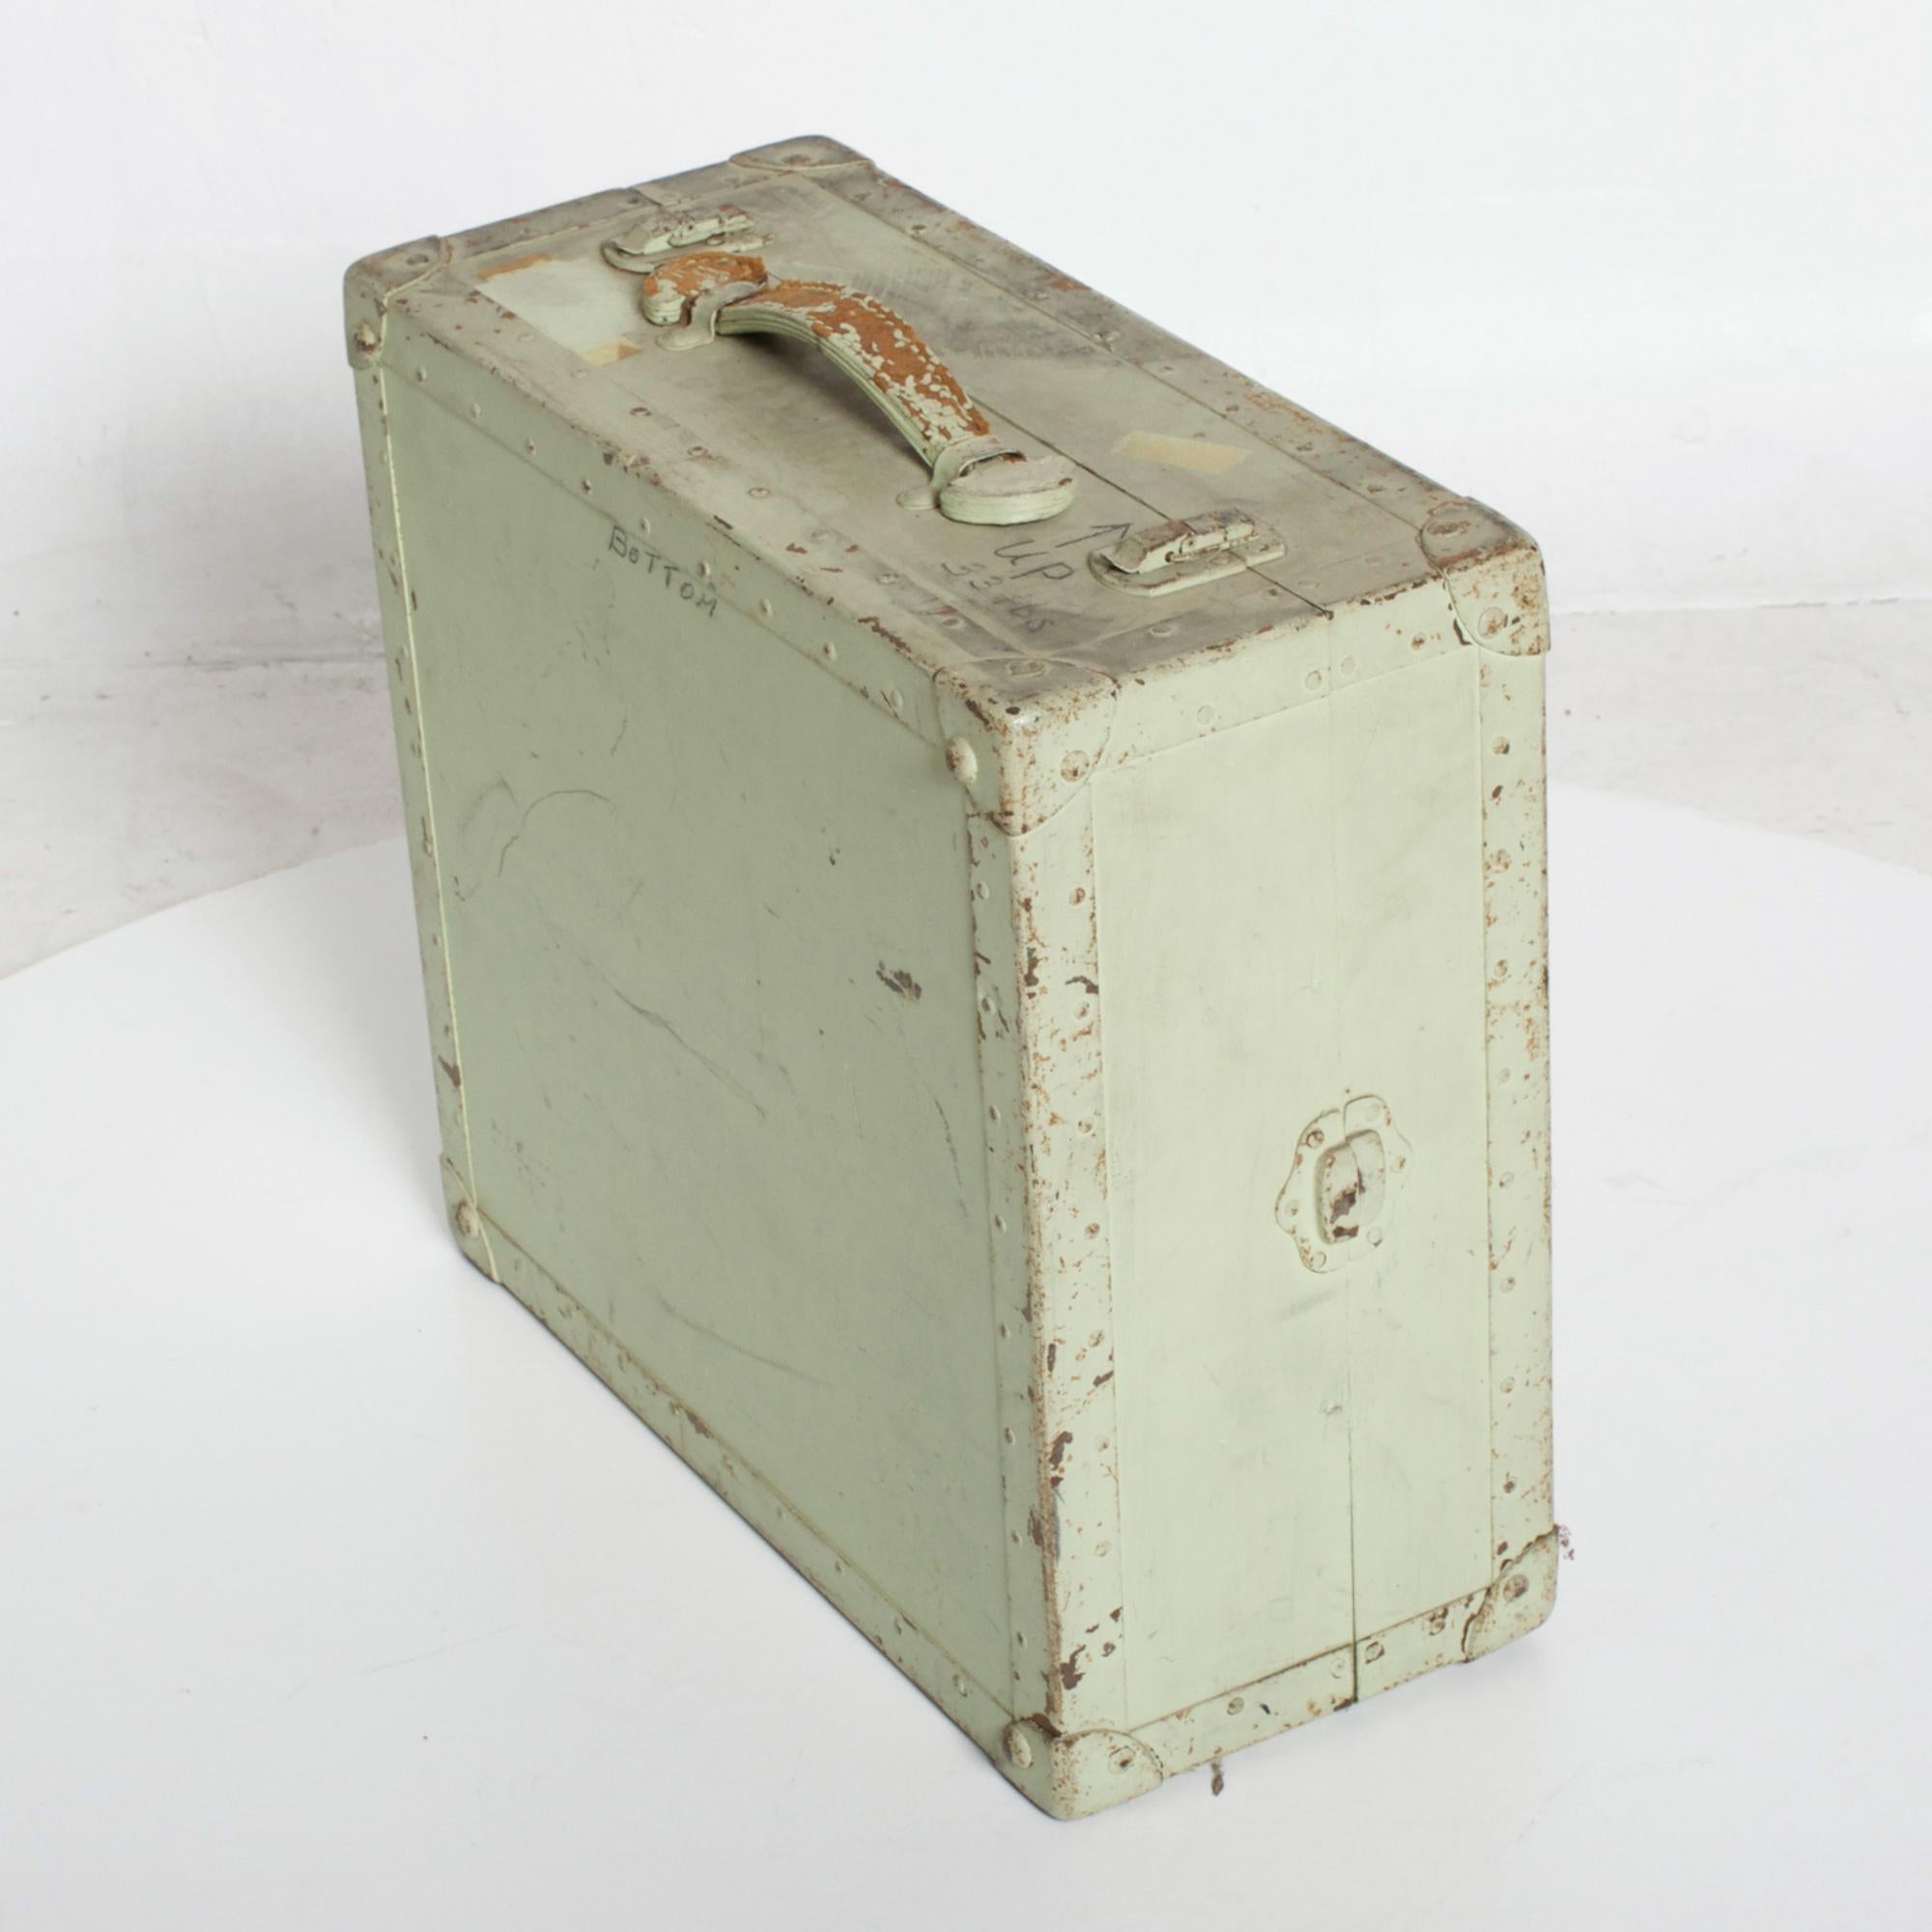  Vintage Military Carry case handled box in wood with leather handles, painted light green
 17.5 W x 7.75H x 15.75 D
Original vintage distressed condition preowned wear and age visible. Wonderful character and charm.
Refer to images please.
